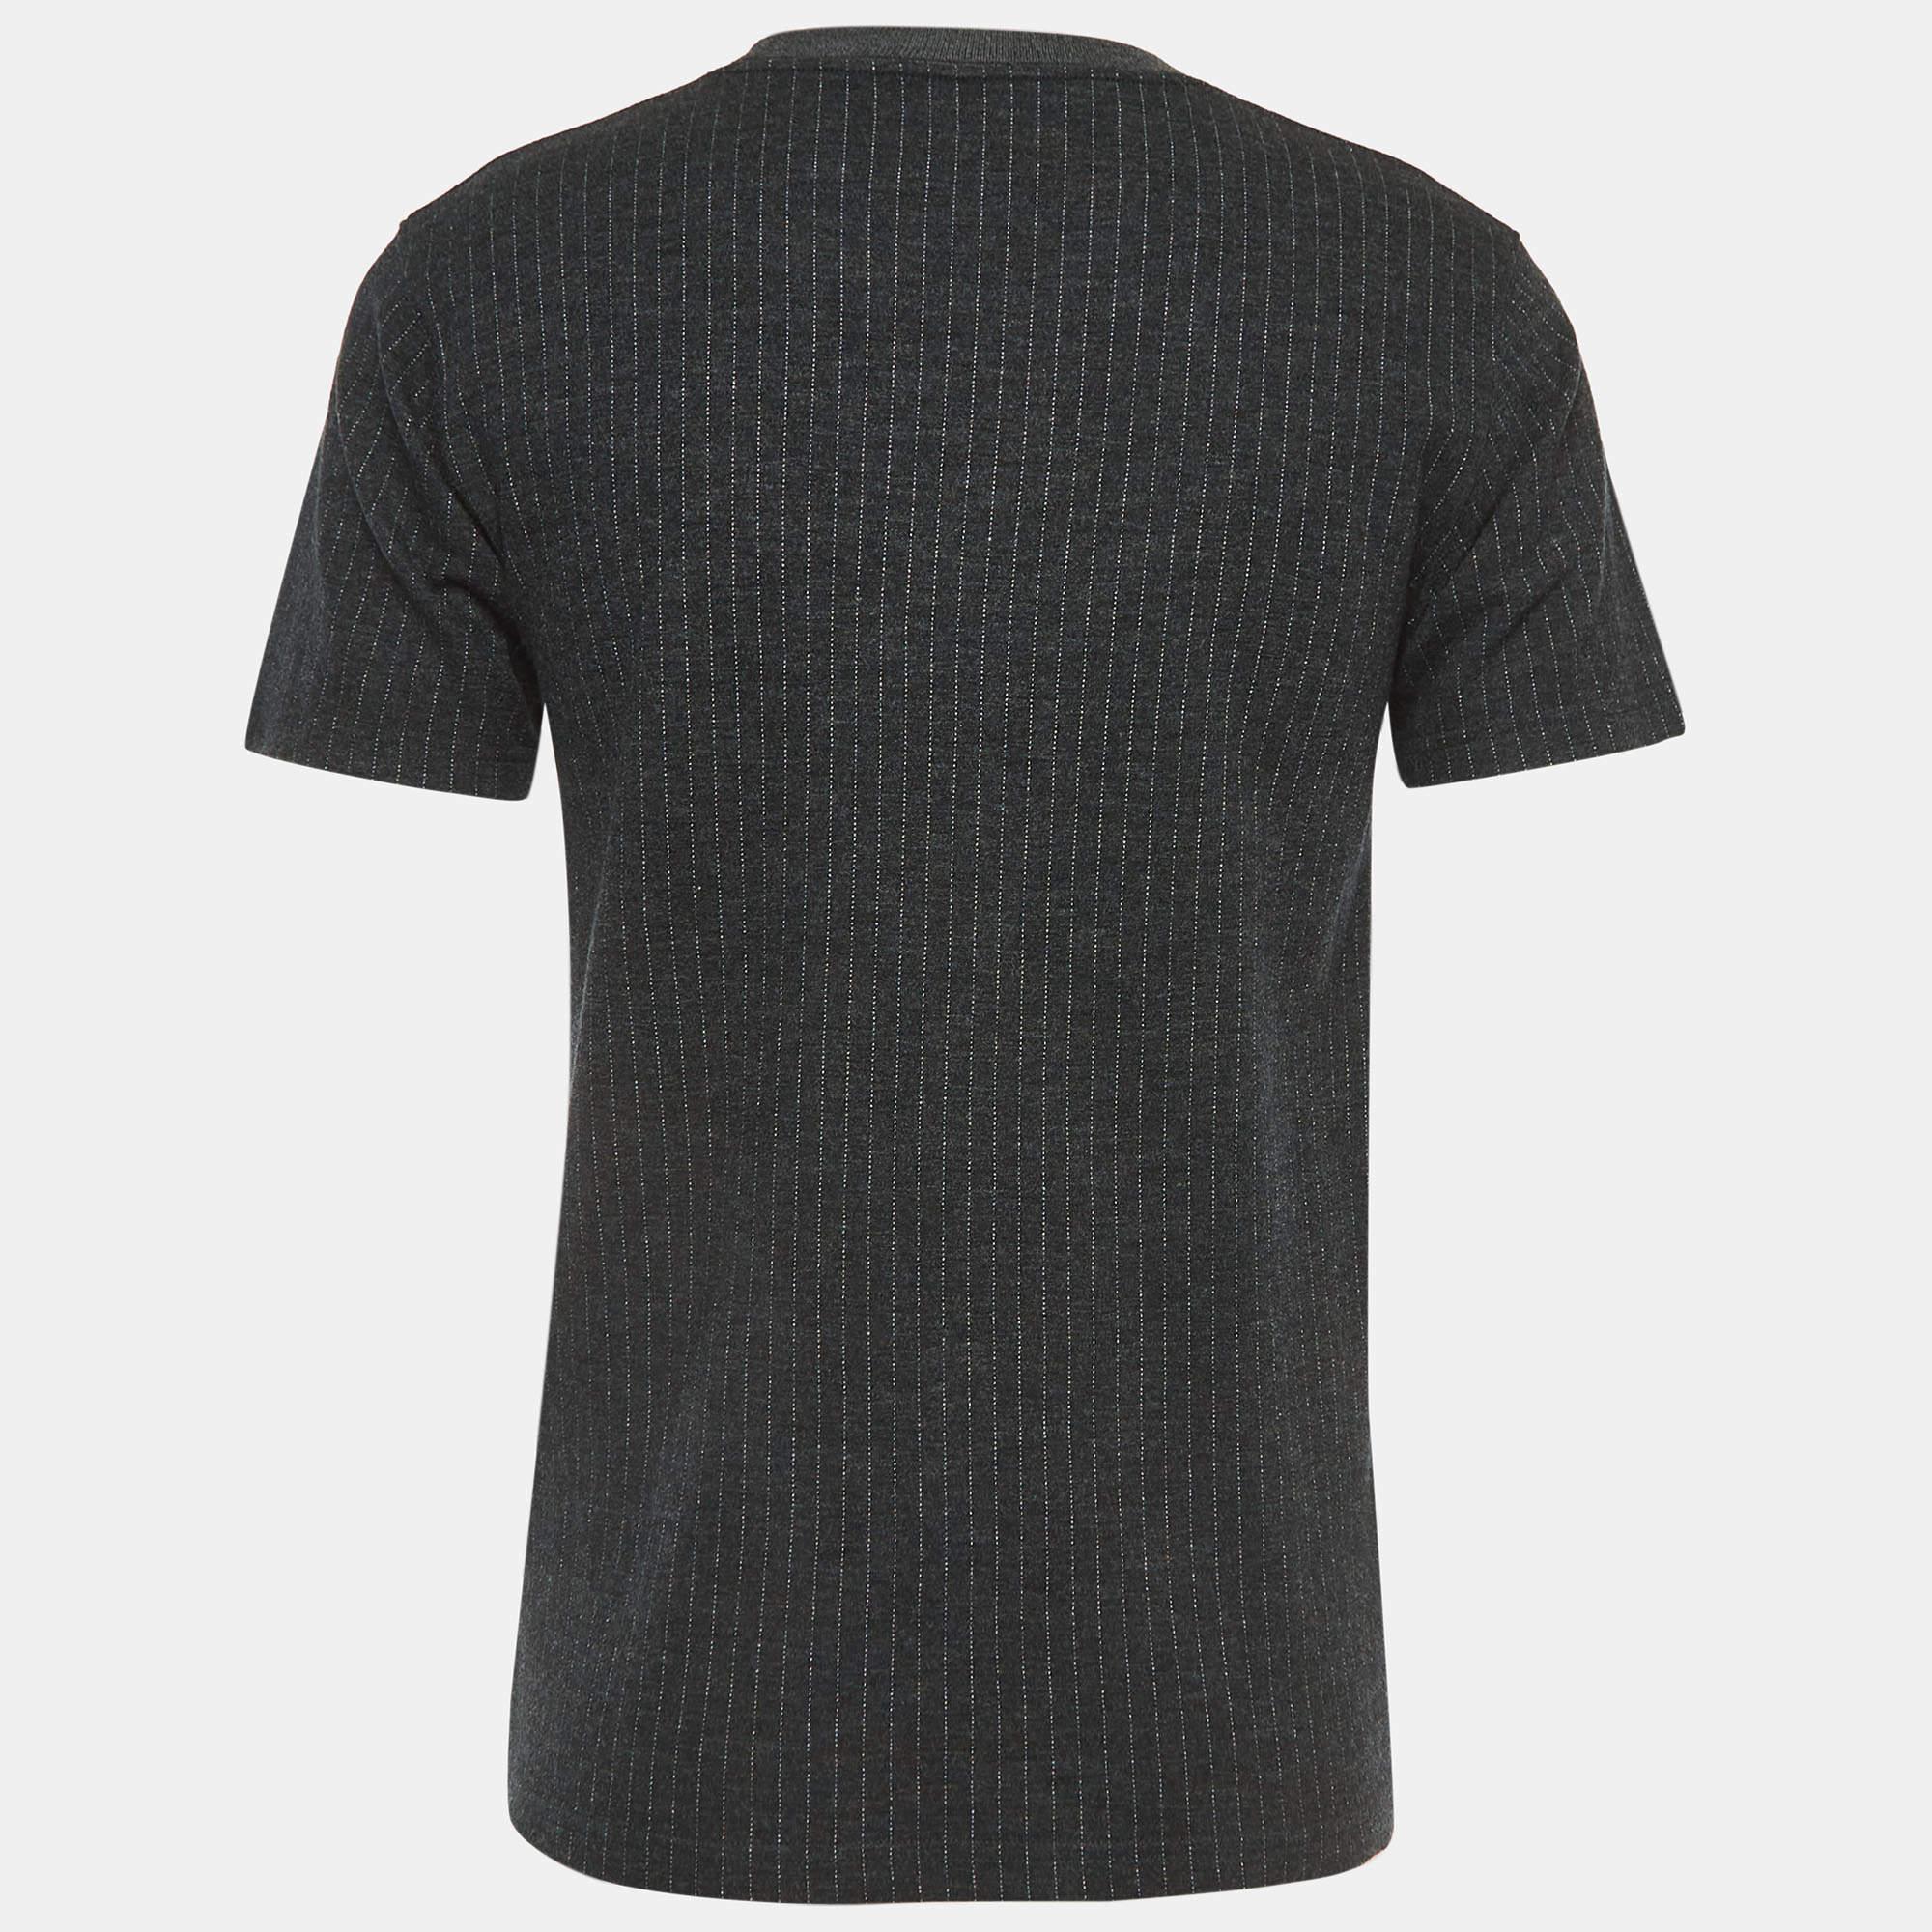 Elevate your everyday style with this meticulously crafted T-shirt by Dior. Impeccable tailoring ensures a perfect fit, while the breathable fabric offers unparalleled ease. The creation fuses fashion and comfort seamlessly.

